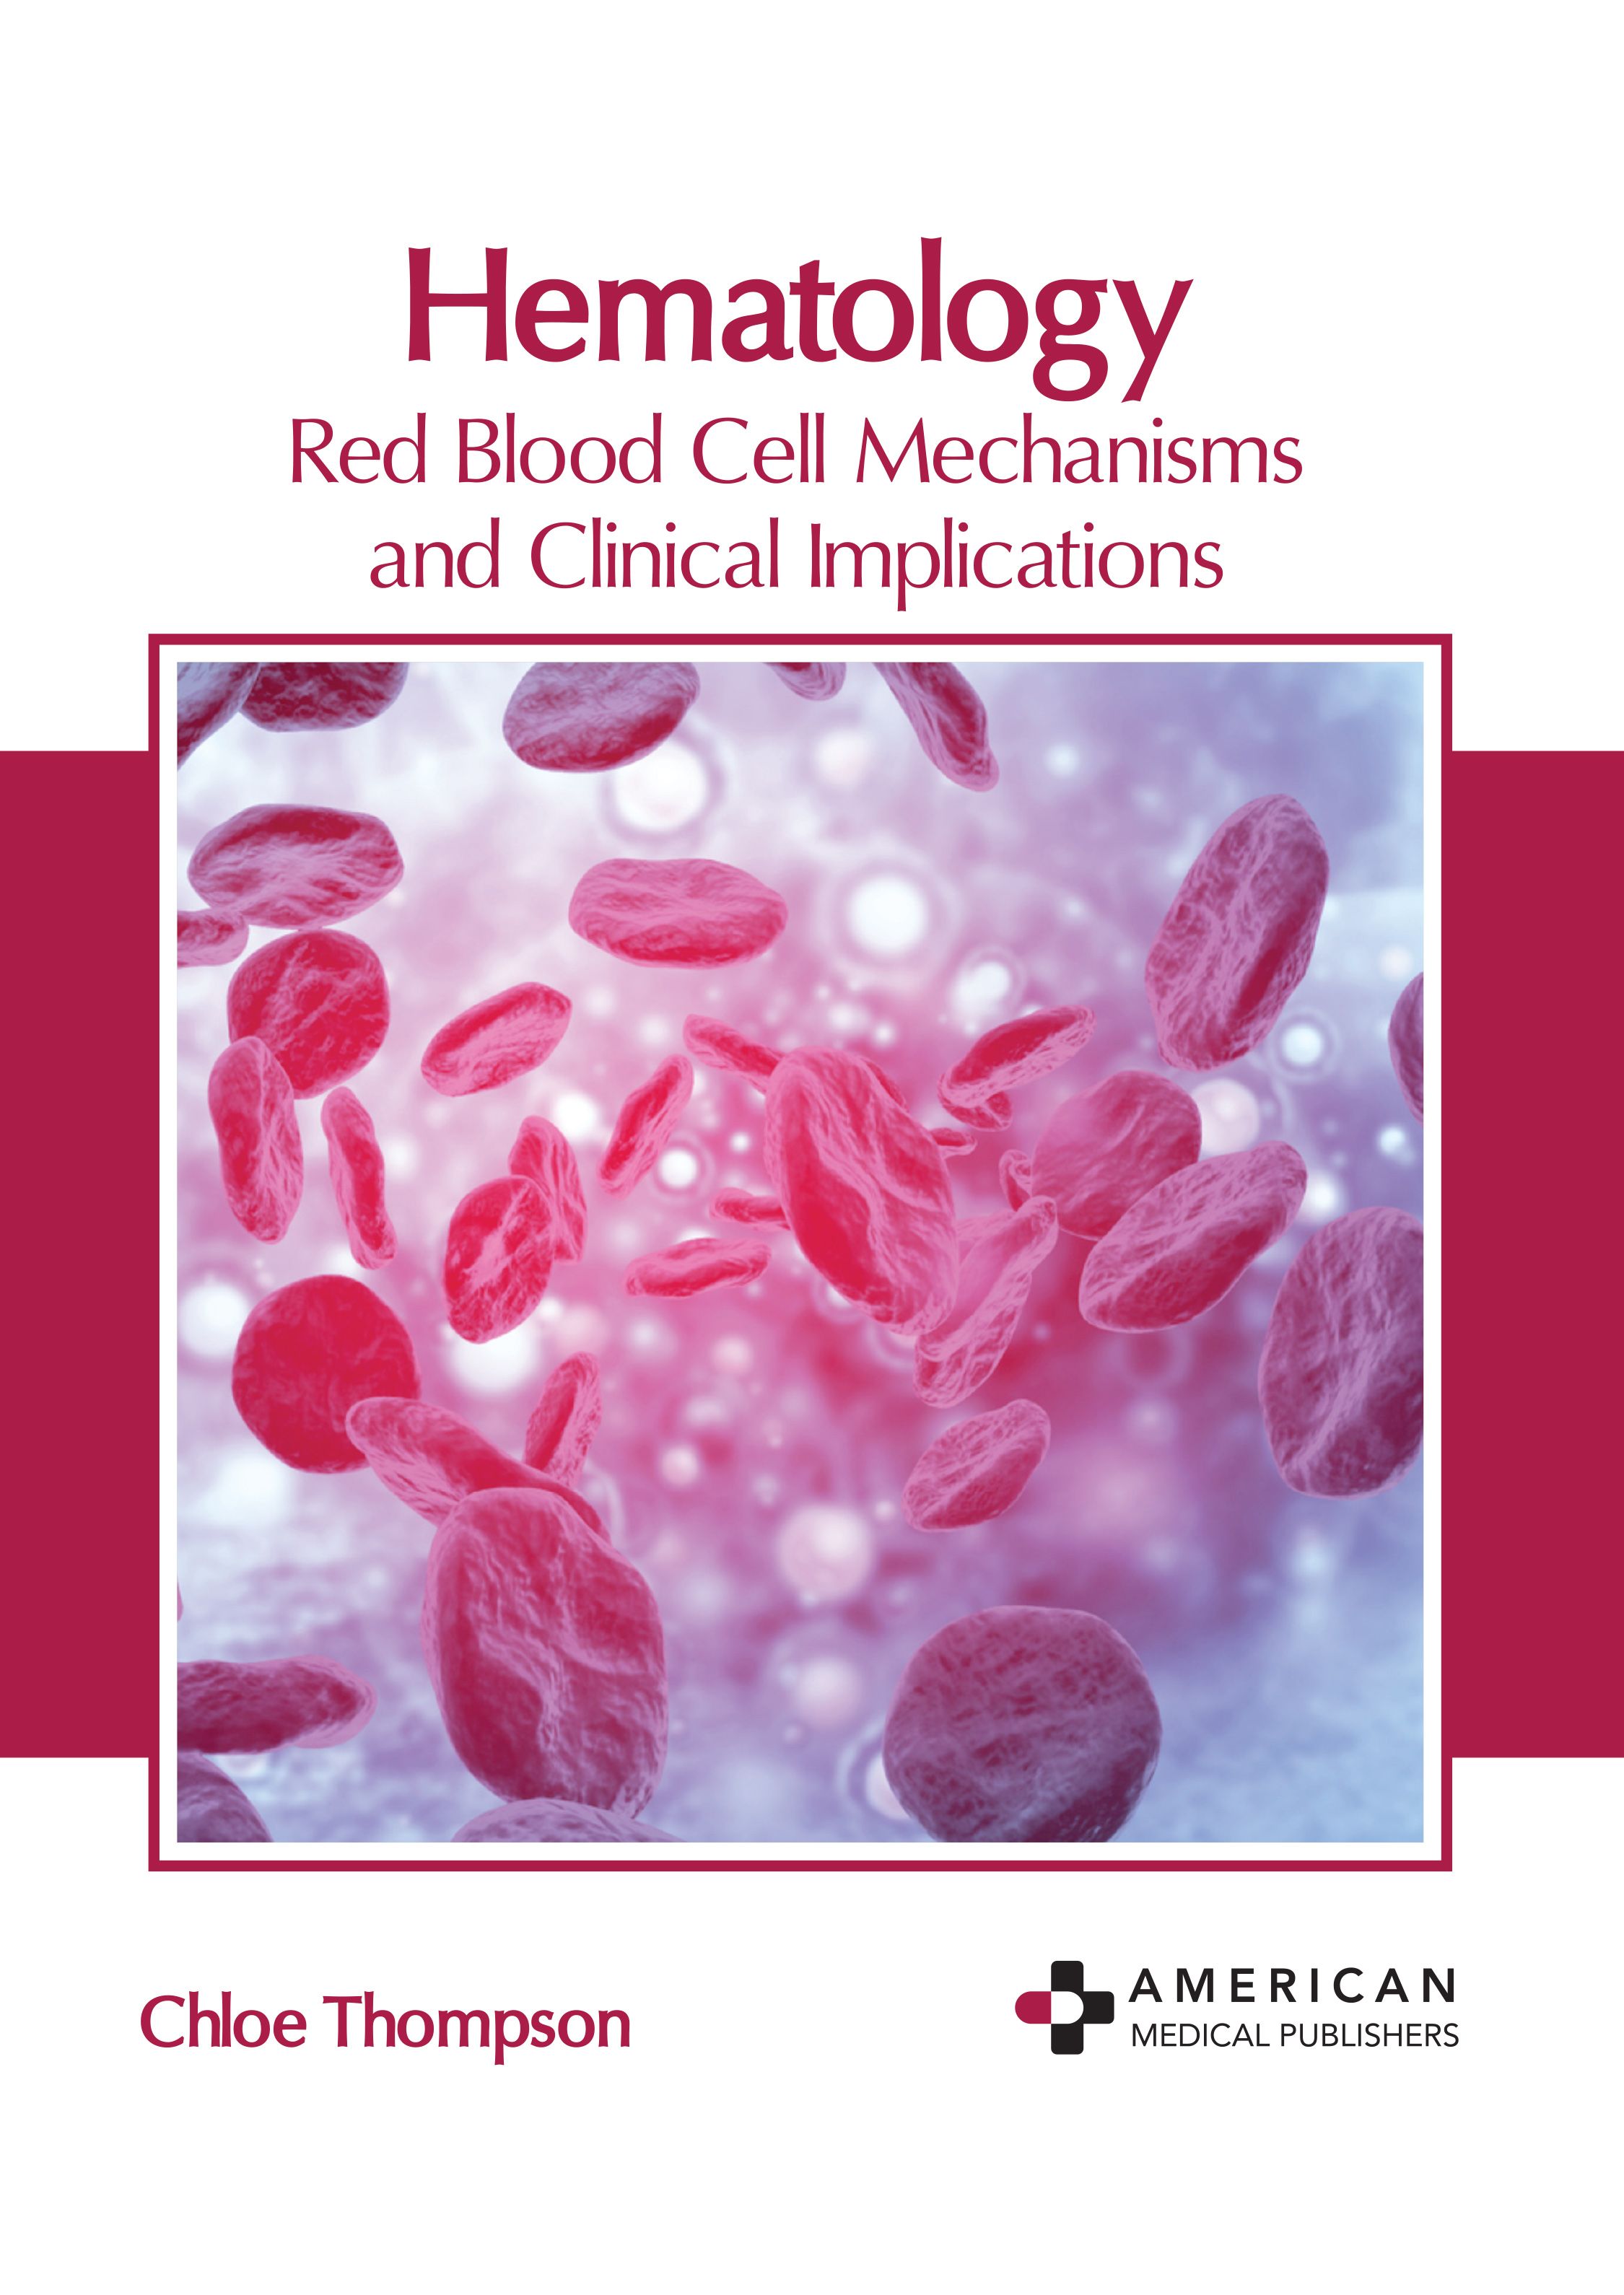 HEMATOLOGY: RED BLOOD CELL MECHANISMS AND CLINICAL IMPLICATIONS